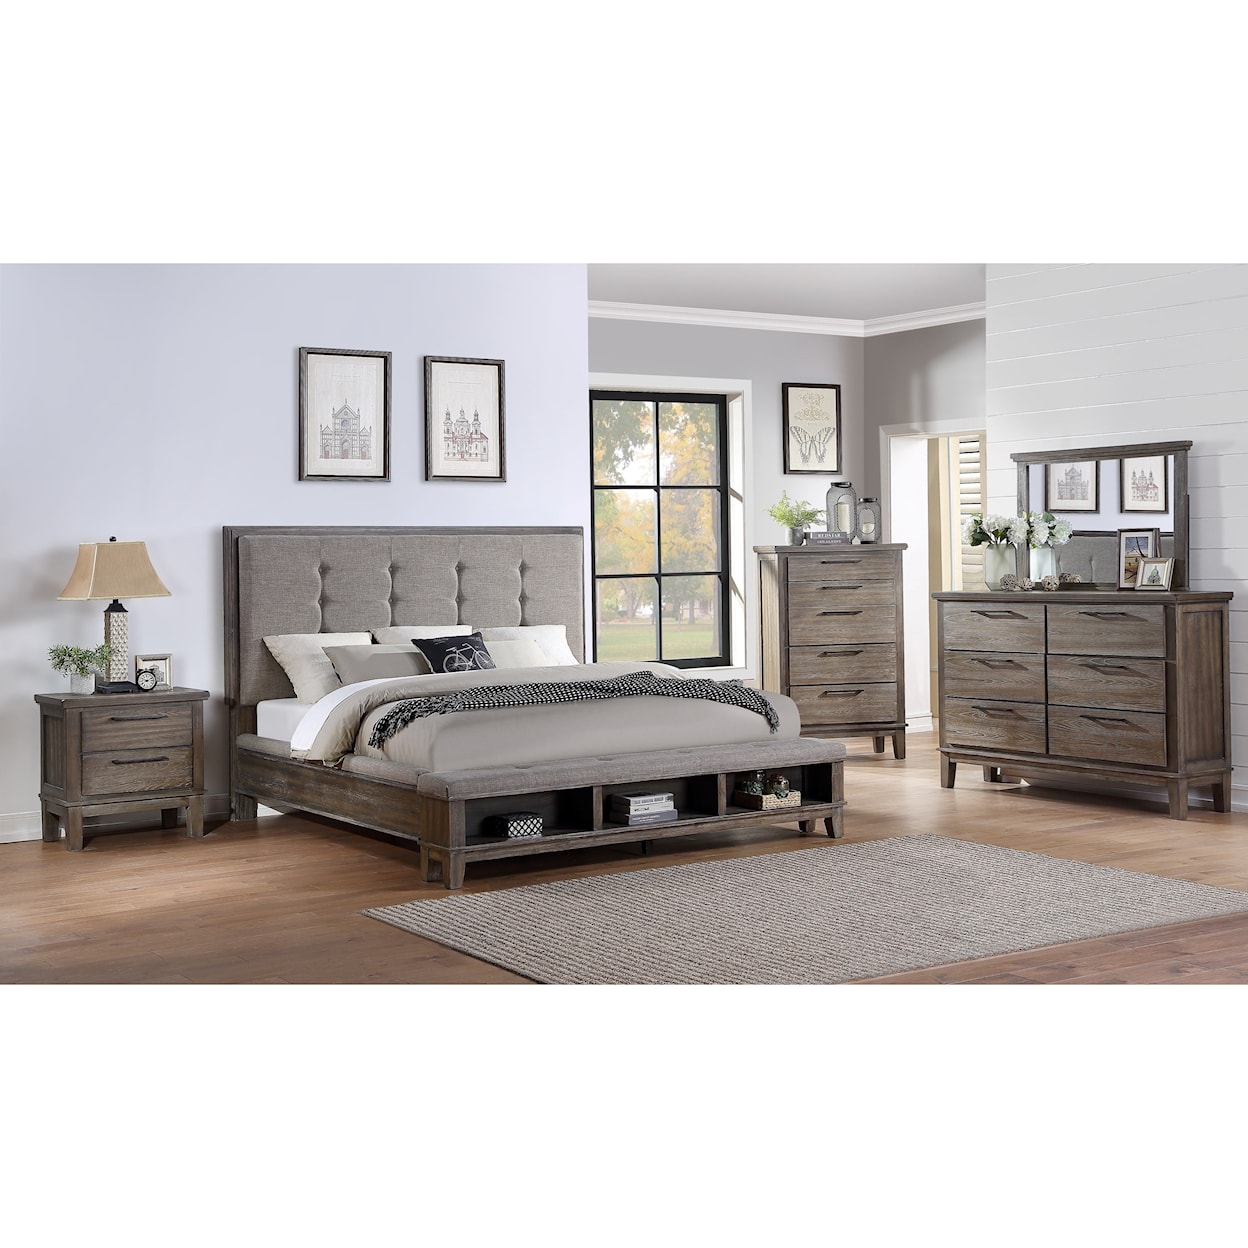 New Classic Cagney 7PC Queen Bedroom Group